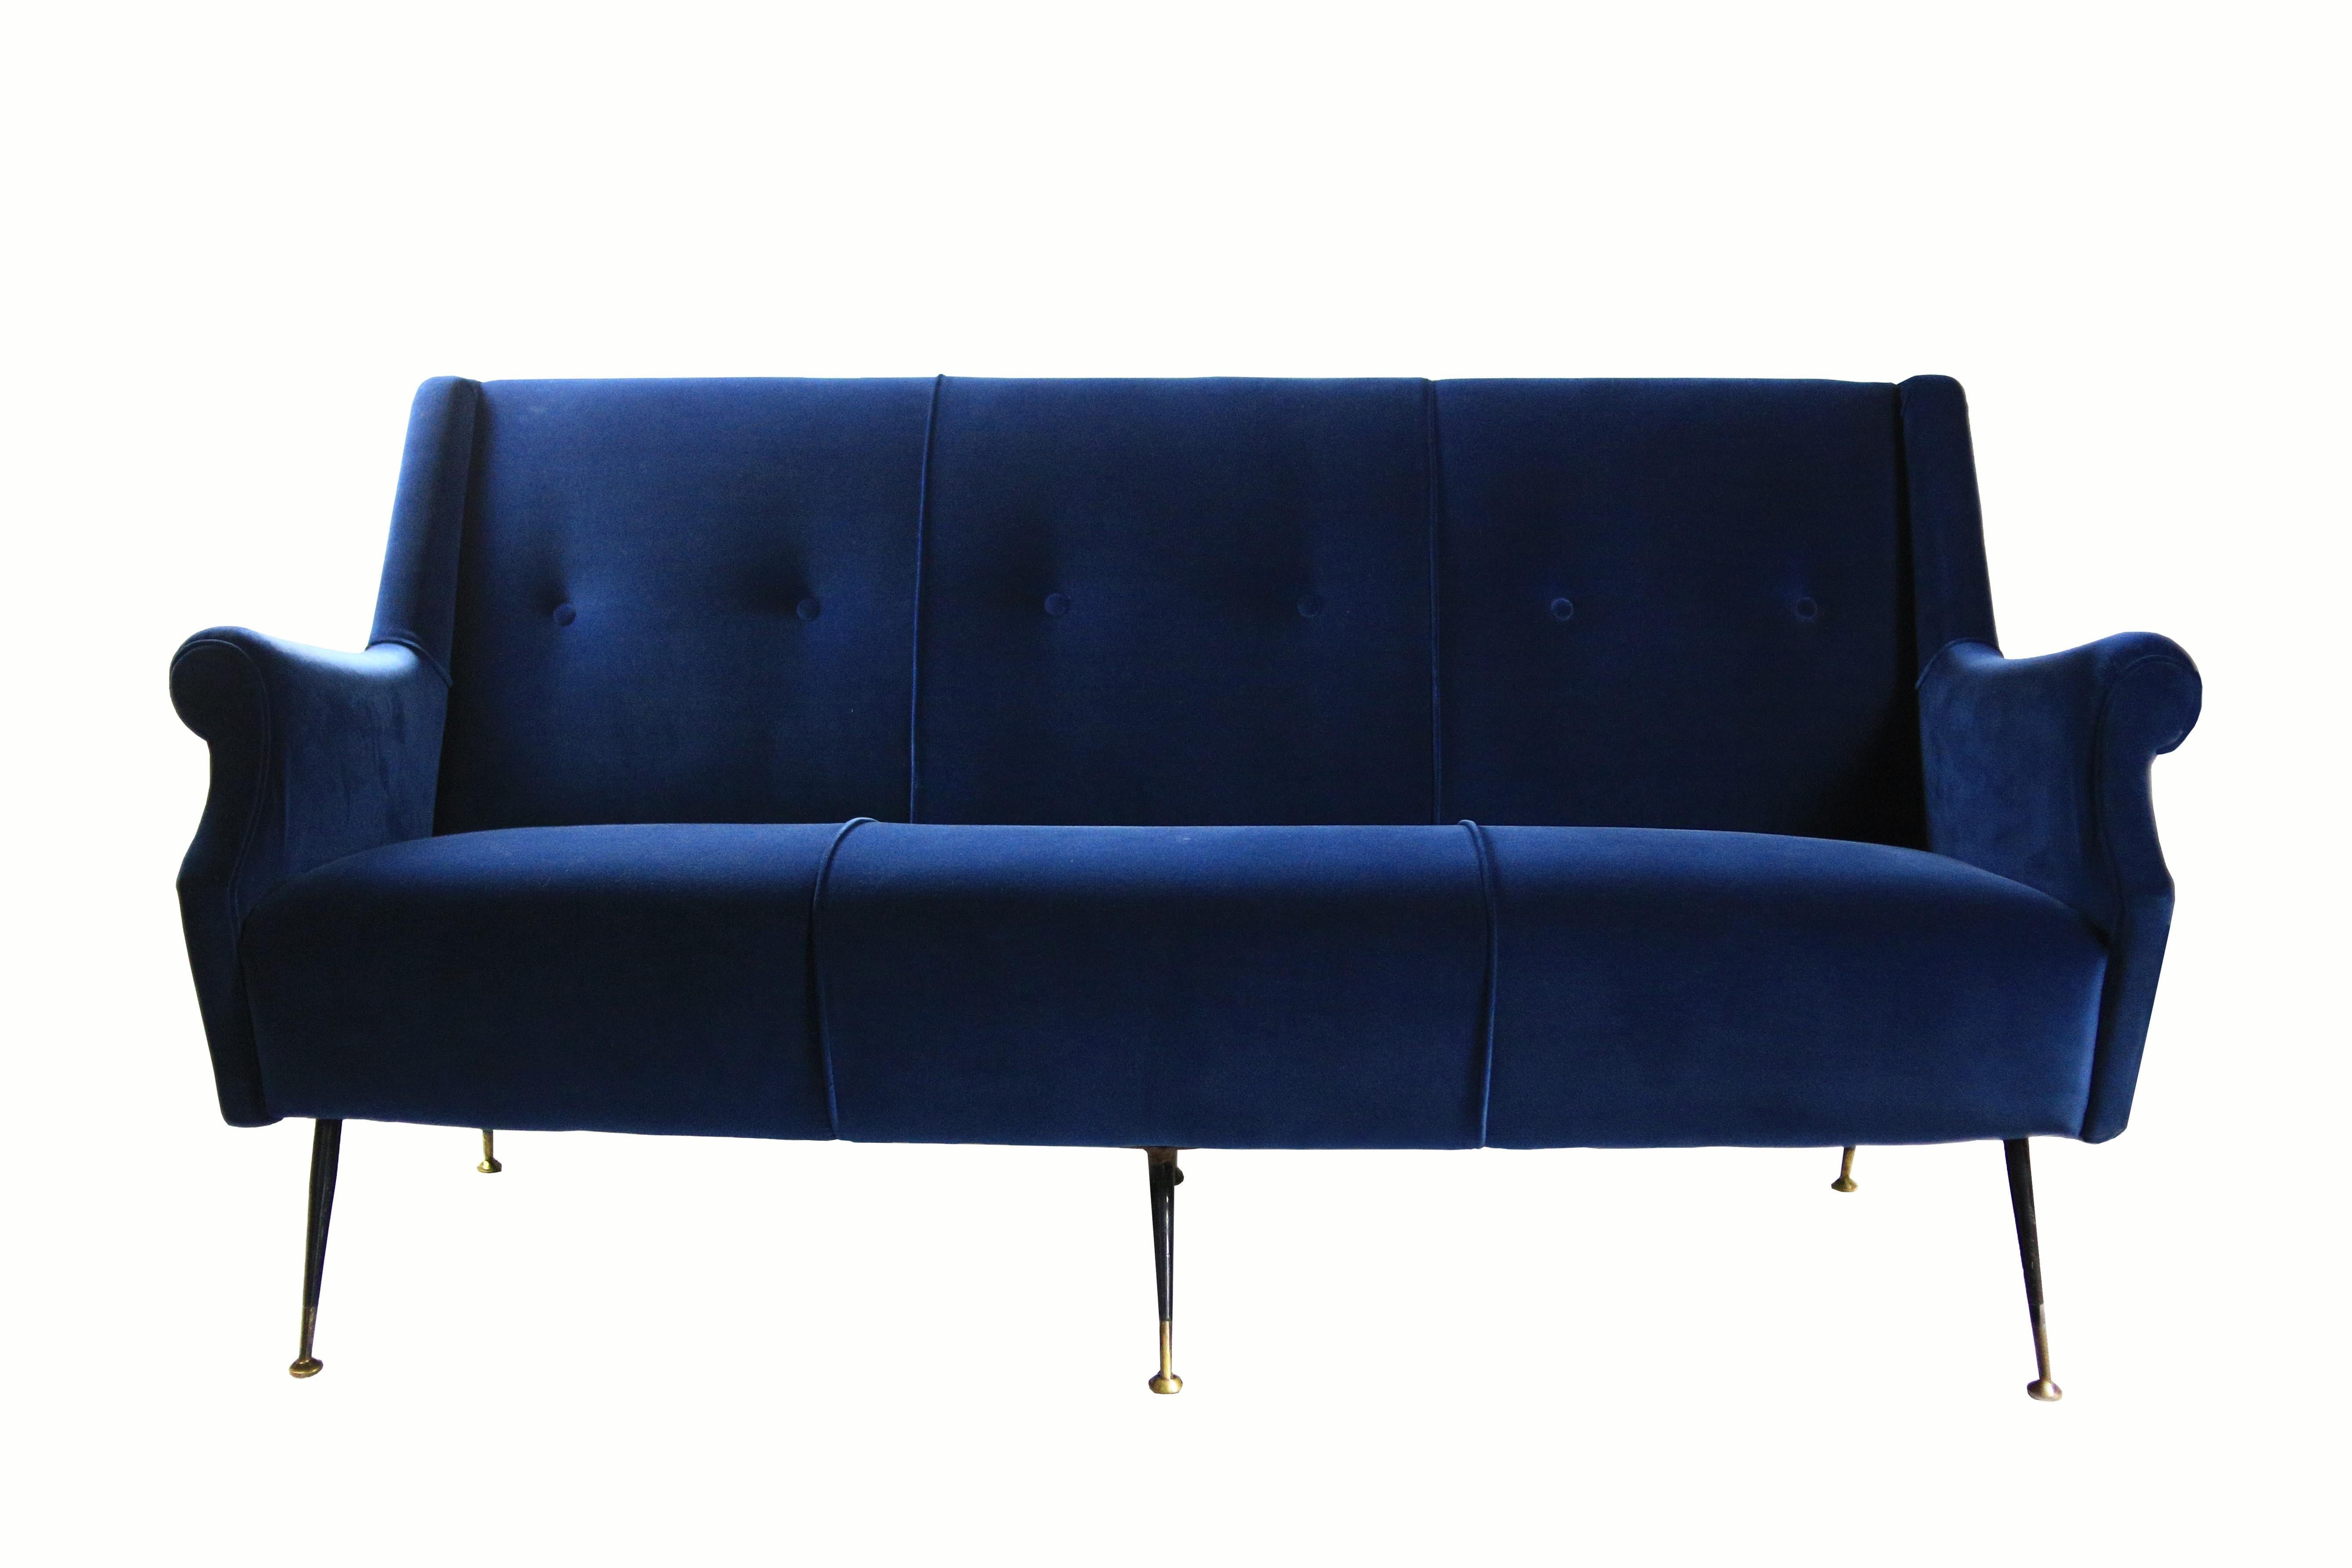 A stunning Mid-Century Modern three-seat Italian sofa, covered in royal blue cotton velvet. The sofa features sculpted armrests and its structure is made of solid wood, with six metal legs and brass feet. Newly refurbished, this sofa is in perfect